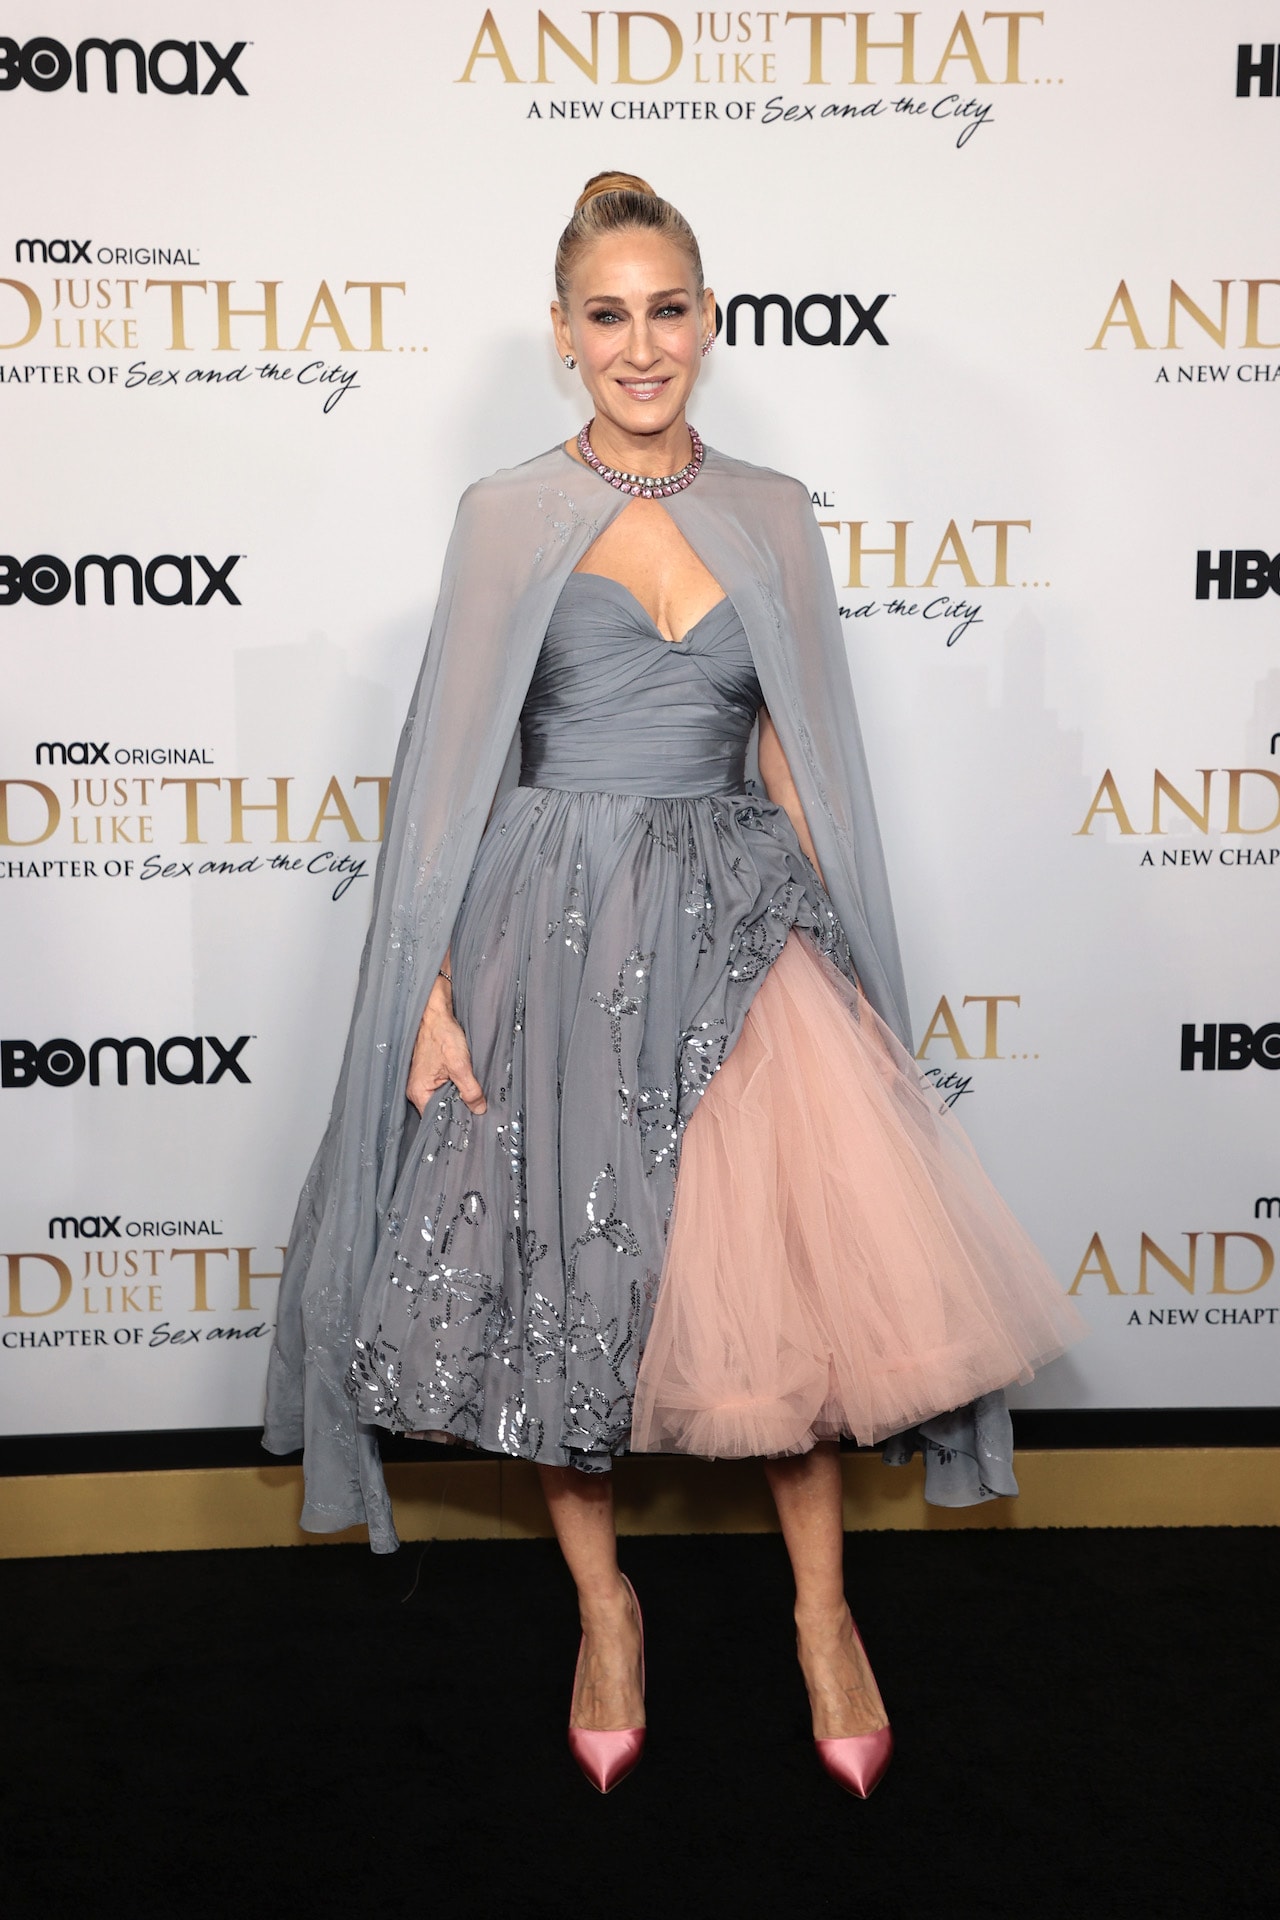 sarah jessica parker sex and the city and just like that premiere hbo max oscar de la renta dress gown sjp shoes heels red carpet